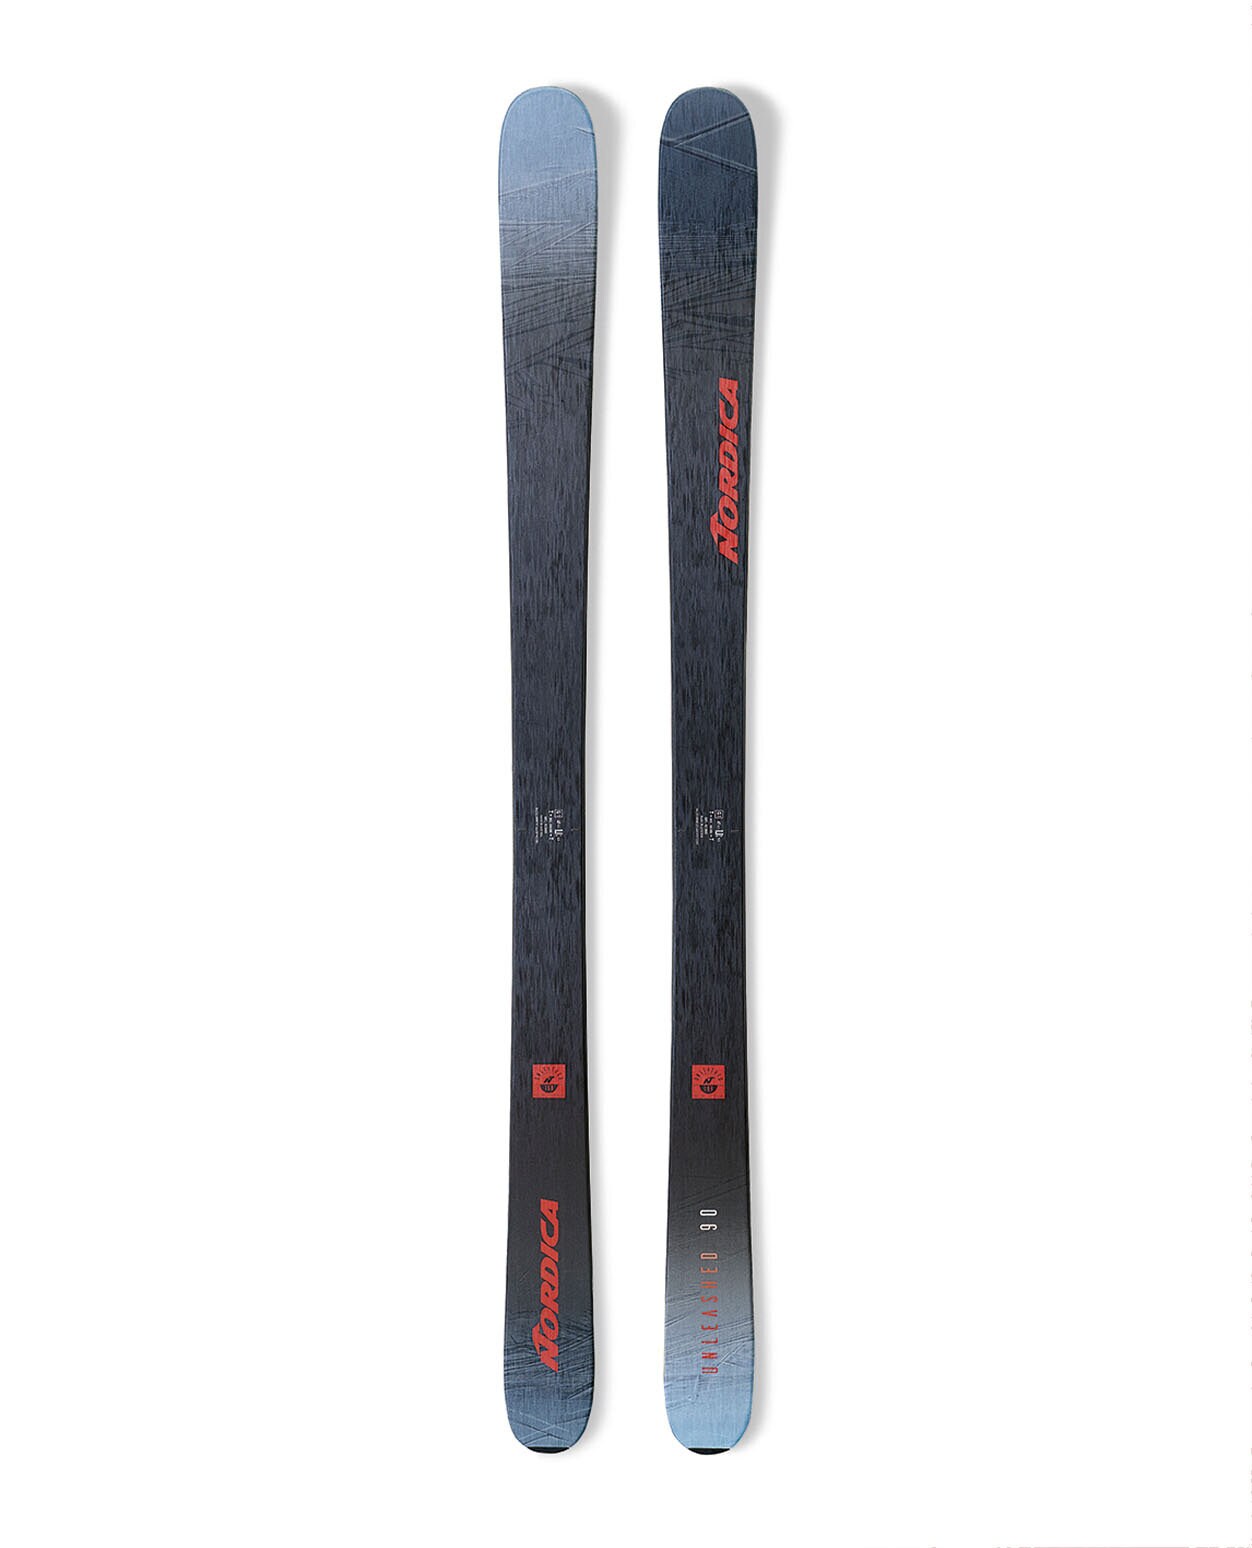 Nordica Unleashed 90 22/23